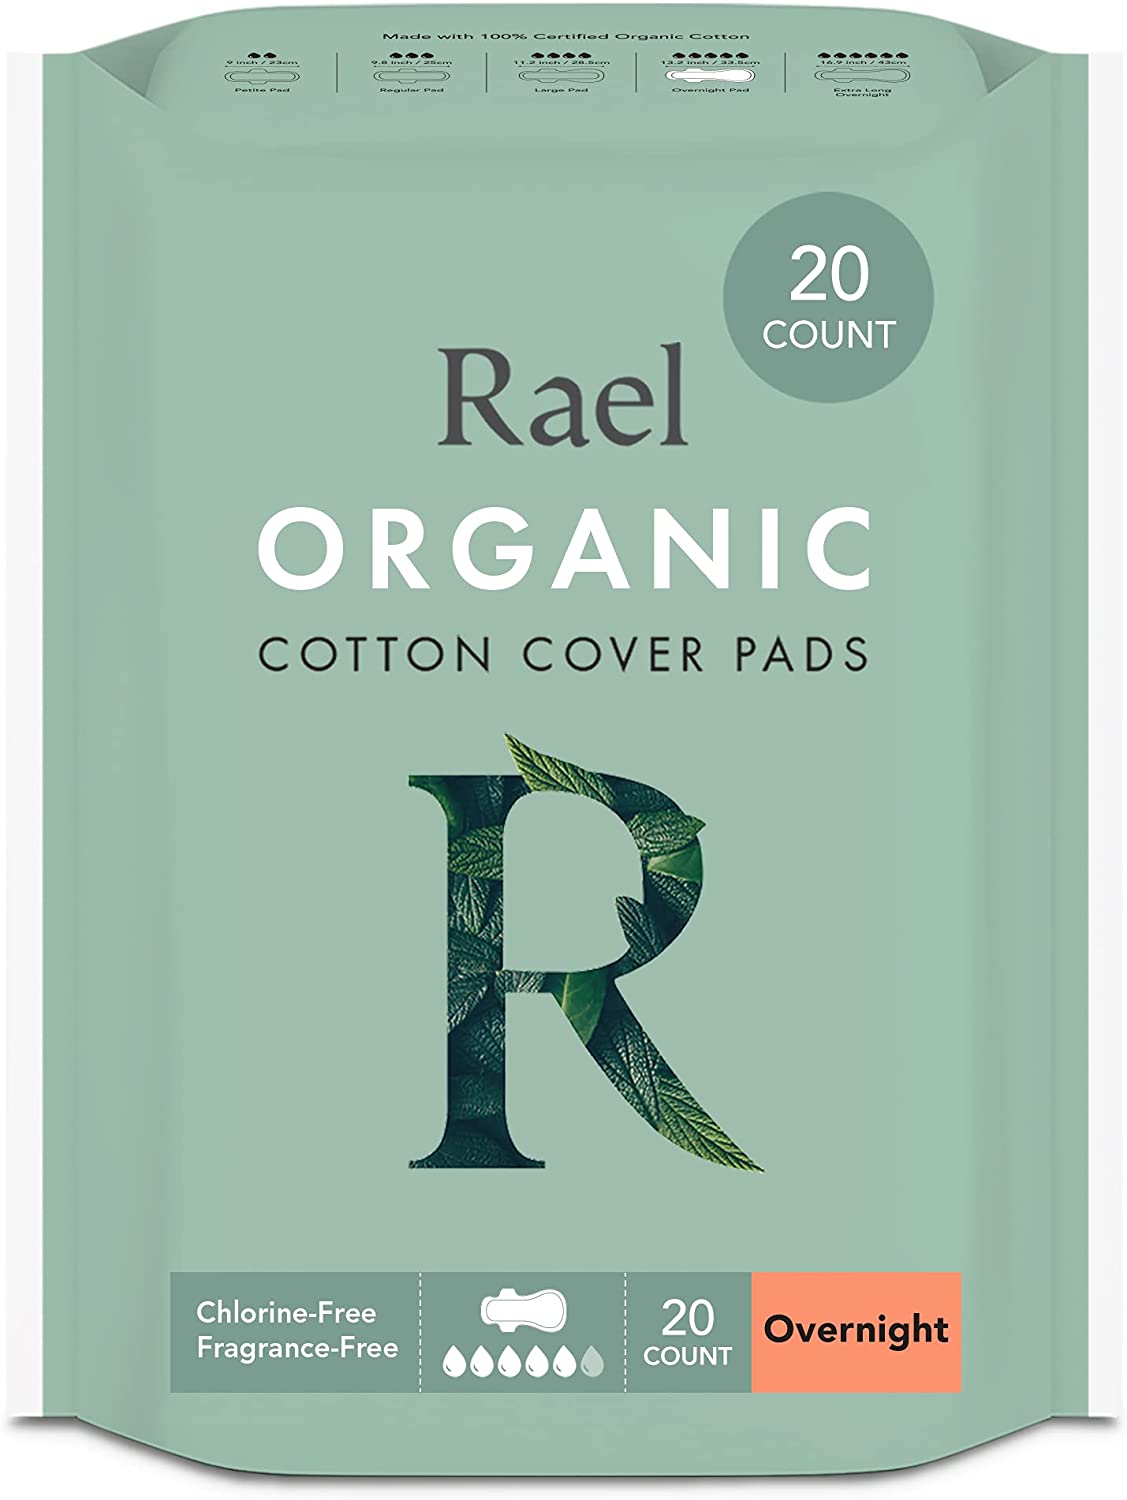 Rael Organic Cotton Cover Pads - Heavy Absorbency